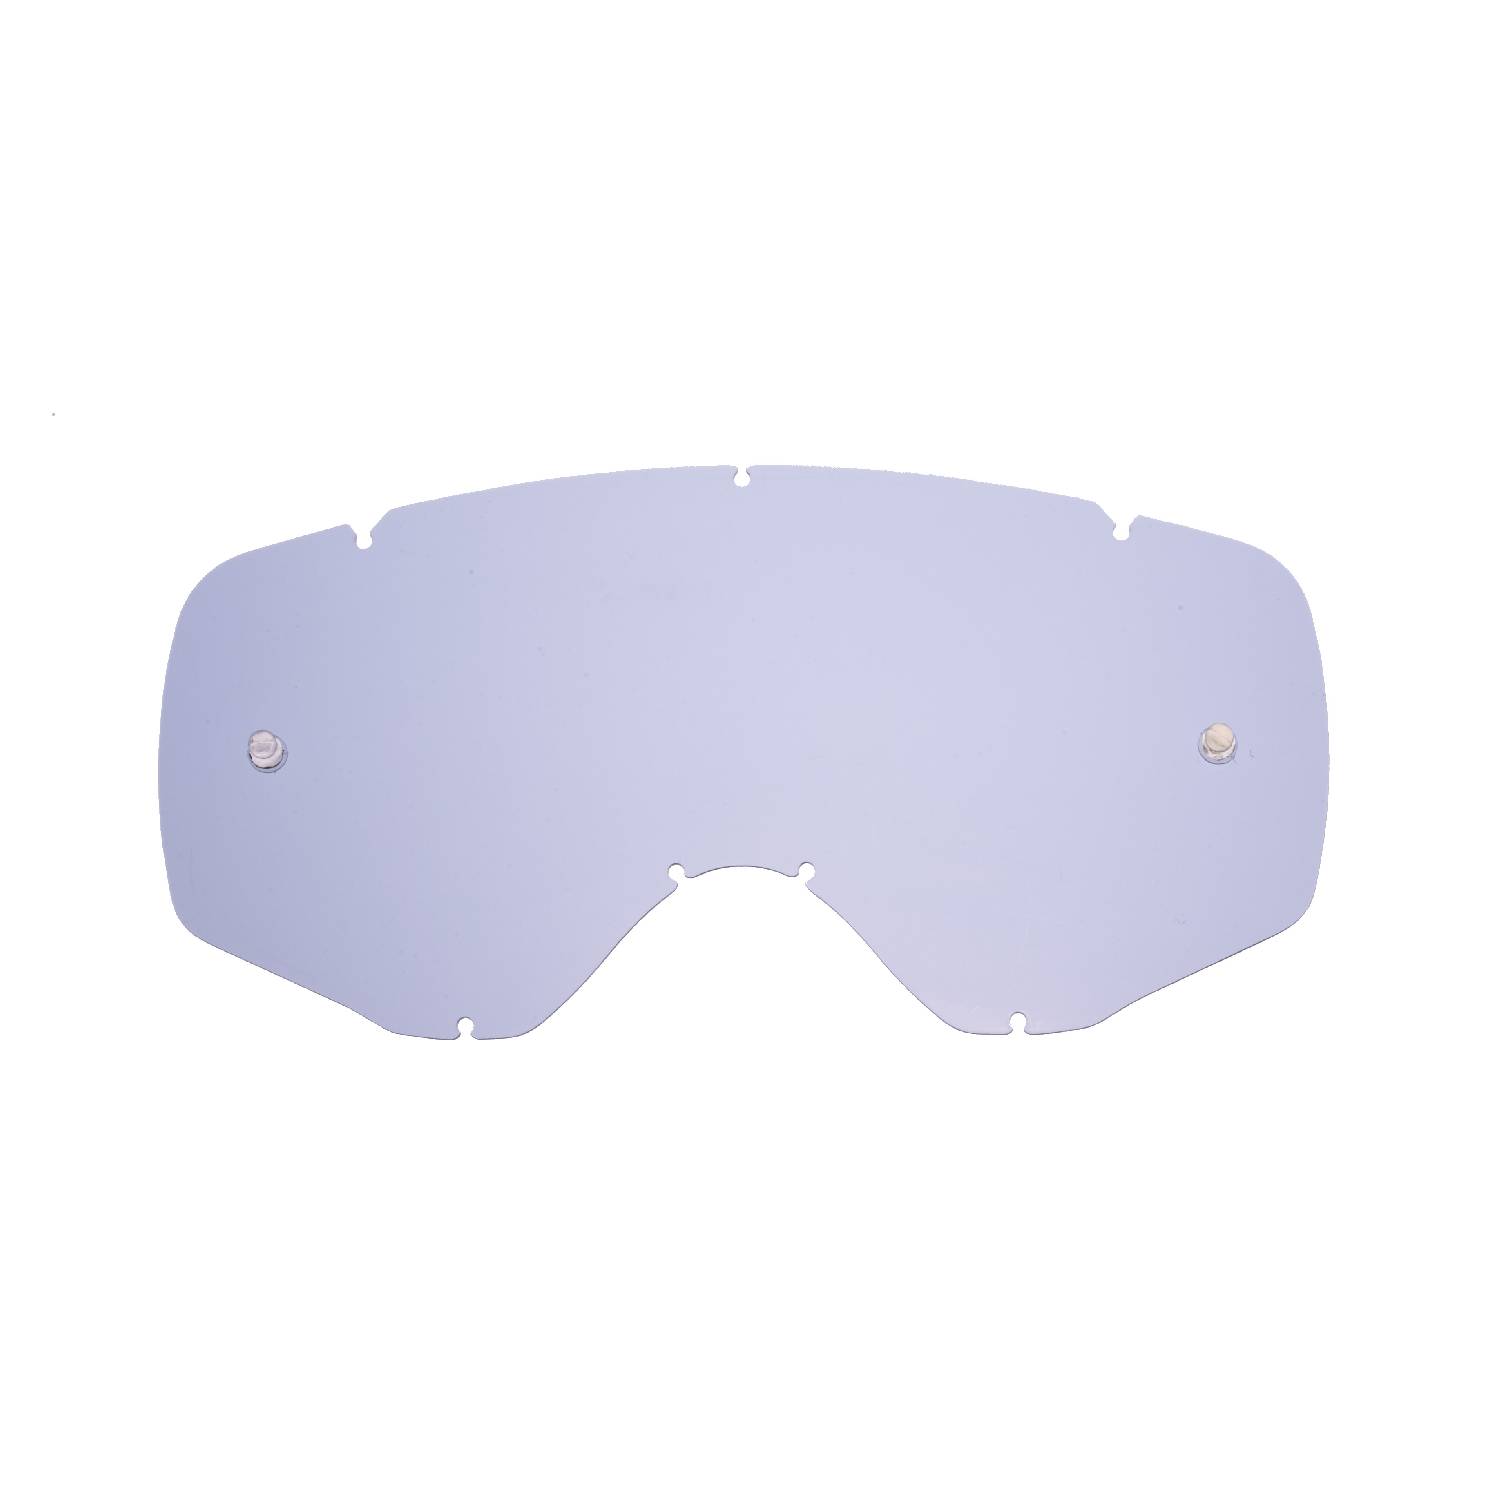 smokey replacement lenses for mx goggles compatible for Ethen Zerosei GP/ Basic / Evolution/ Mud Mask goggle